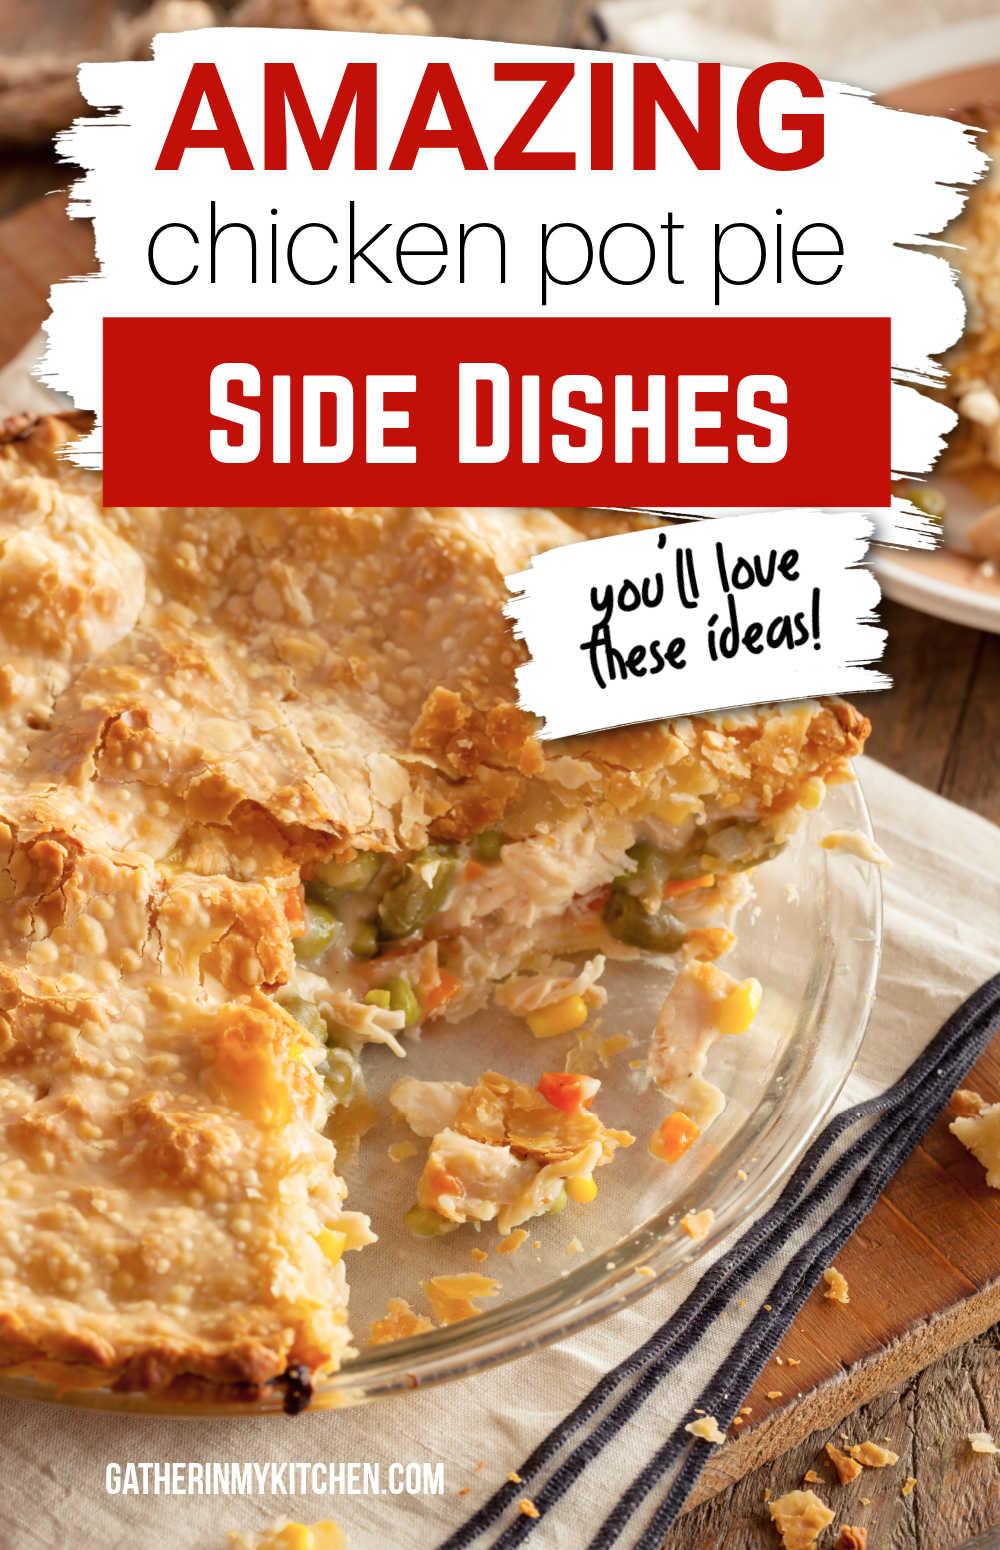 Pin image: top says "Amazing chicken pot pie side dishes: you'll love these ideas!" and bottom has a chicken pot pie in a pie pan with a large slice taken out.